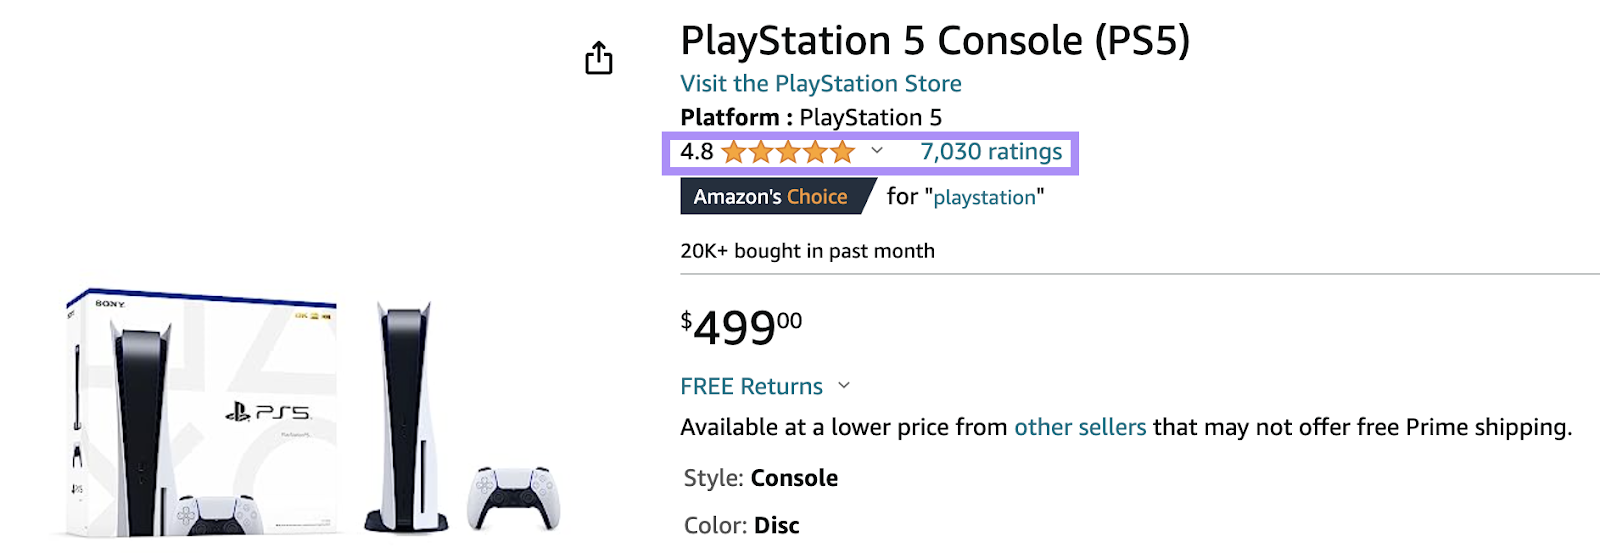 PlayStation 5 Console (PS5) listing on Amazon with reviews highlighted